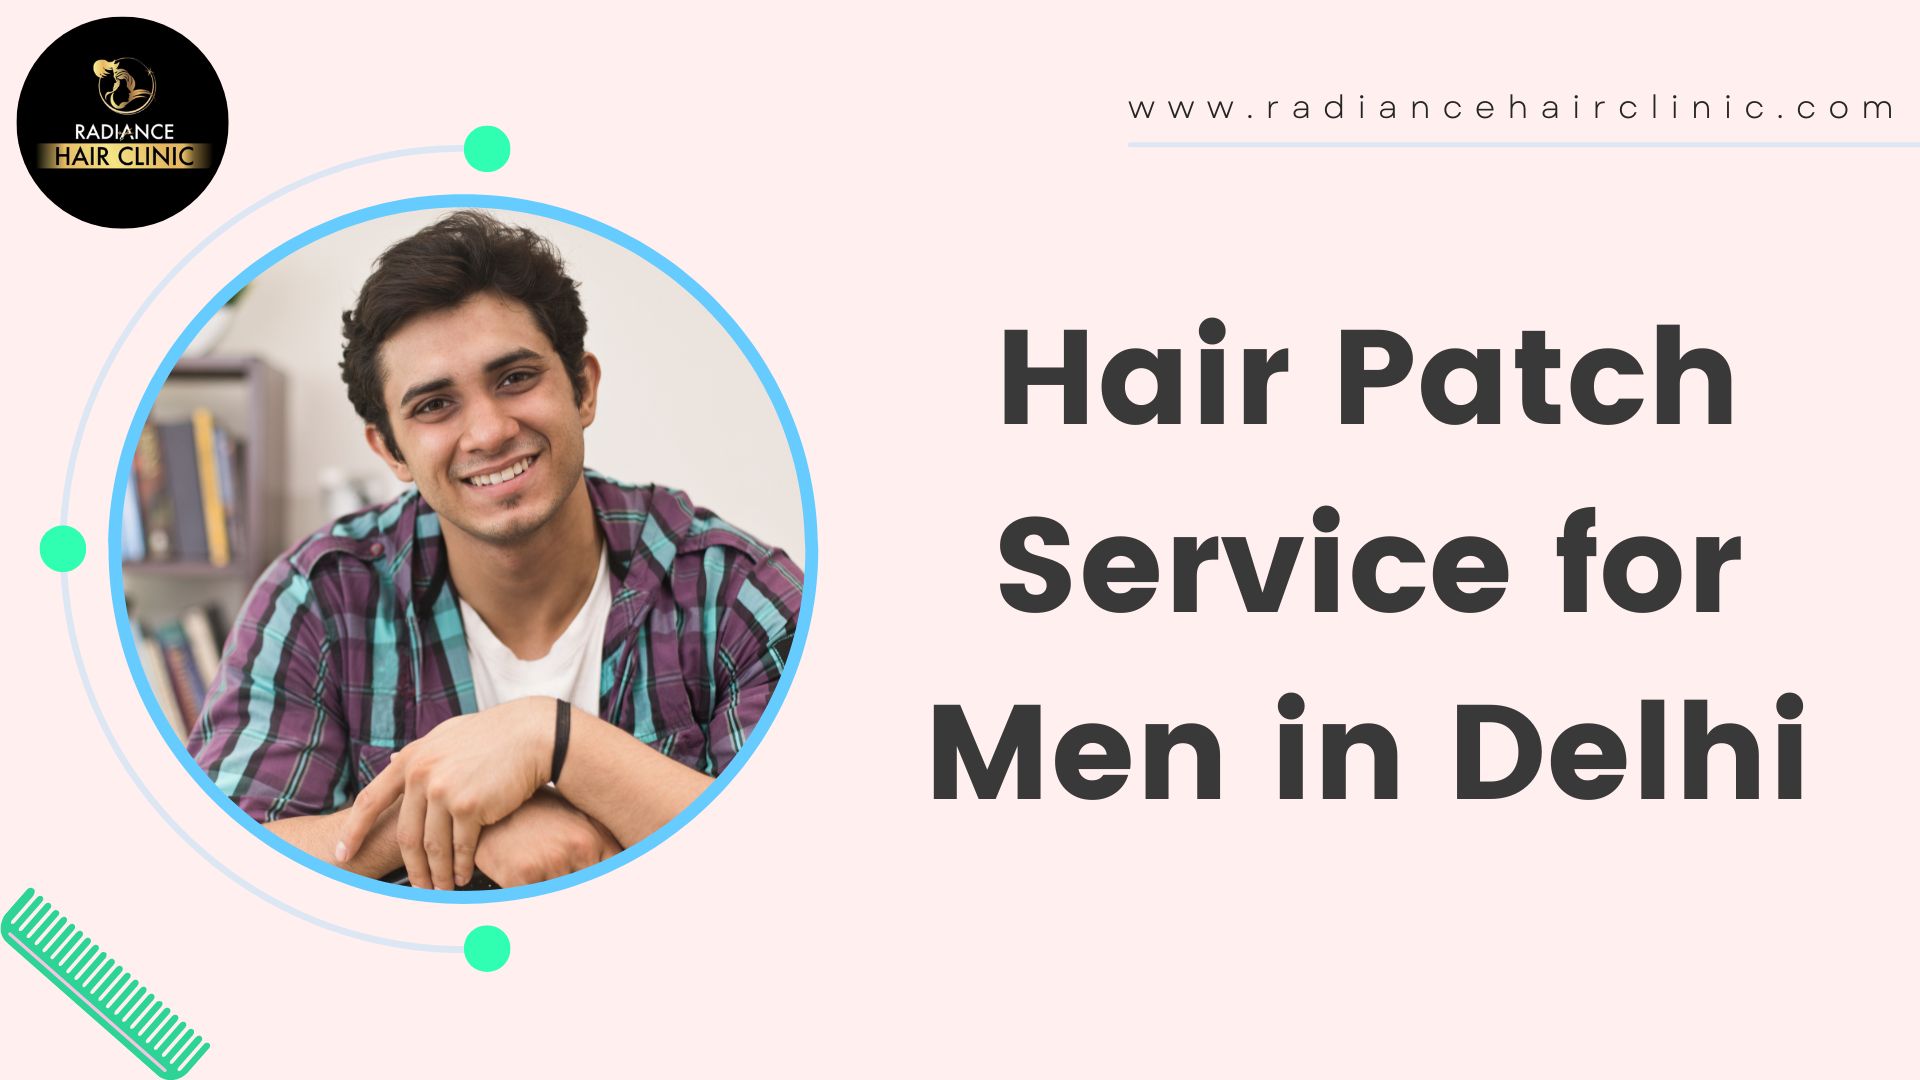 Hair Patch Service for Men in Delhi